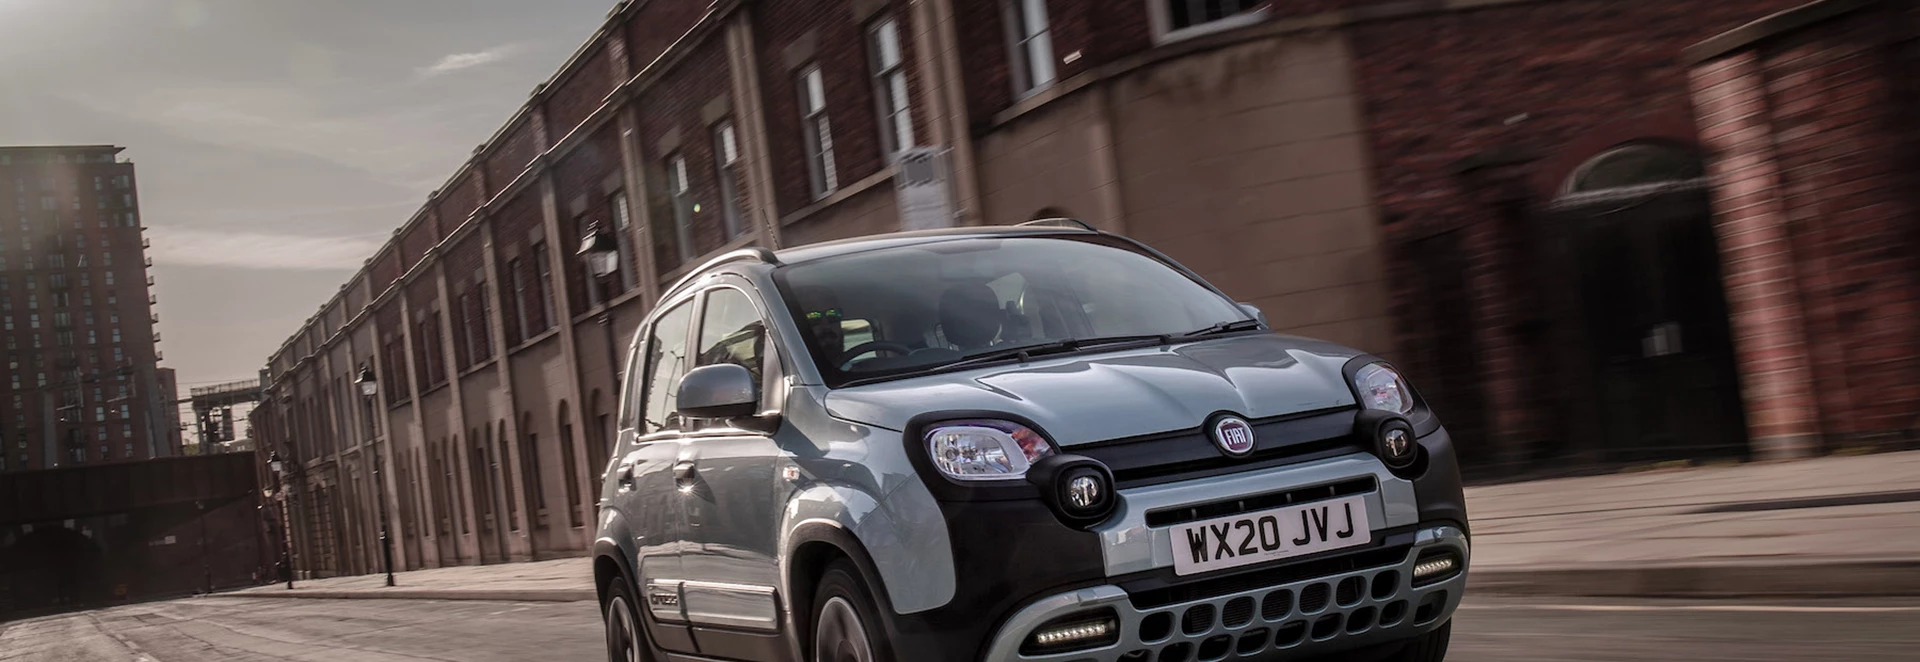 Why is the Fiat Panda such a good city car? 